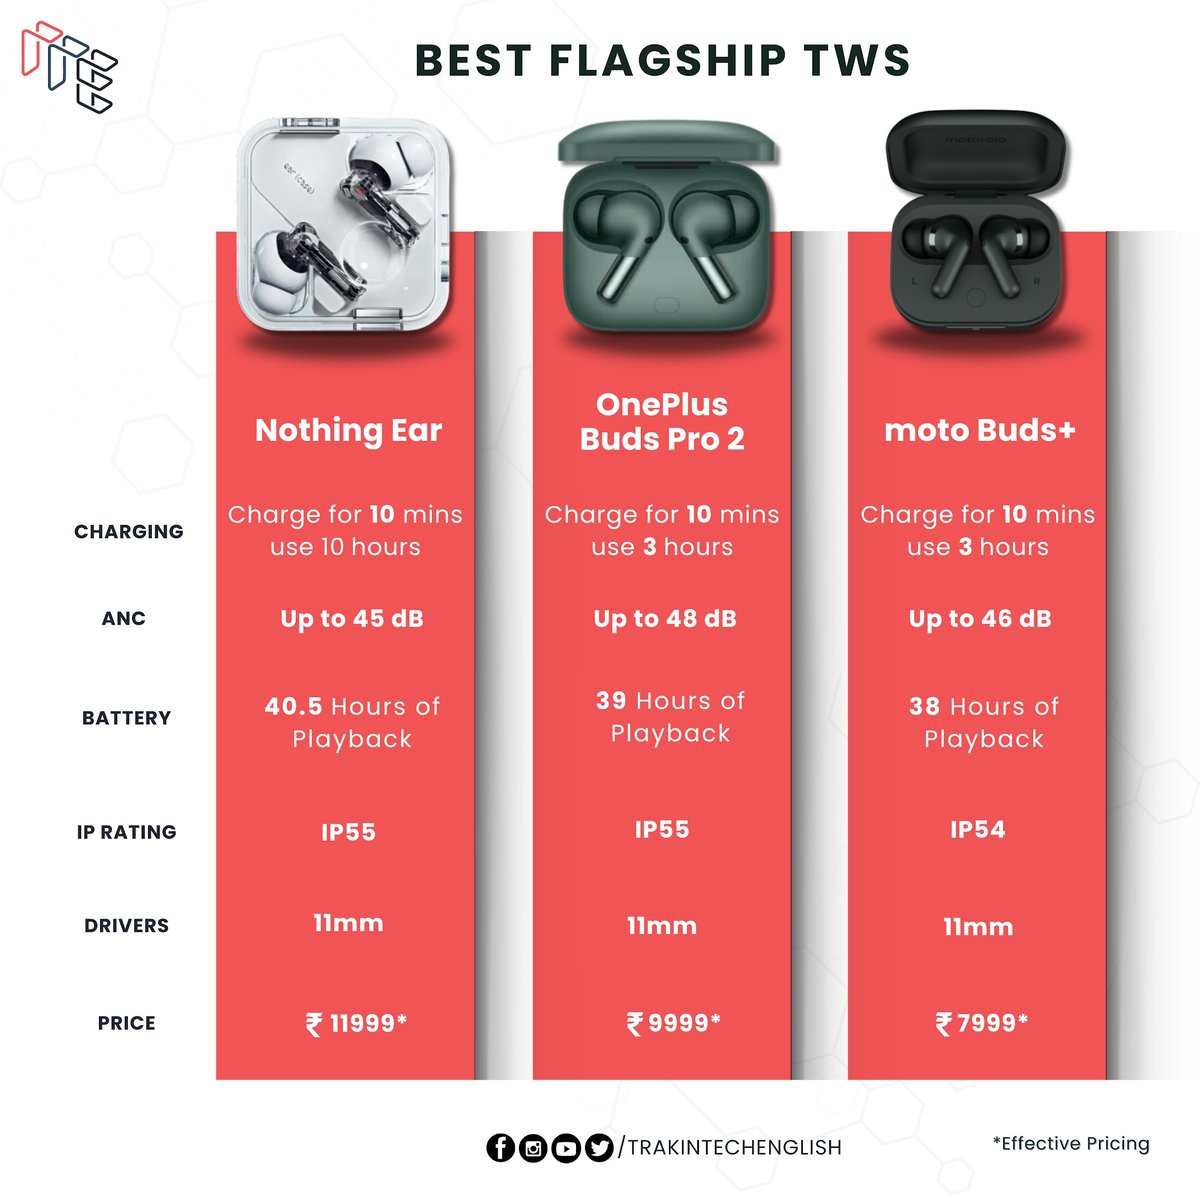 Some of the best flagship TWS available in the Indian Market right now! Comment down below your favorite one amongst these! 👇🏻 #nothingear #oneplusbudspro2 #motobuds+ #TWS #earbuds